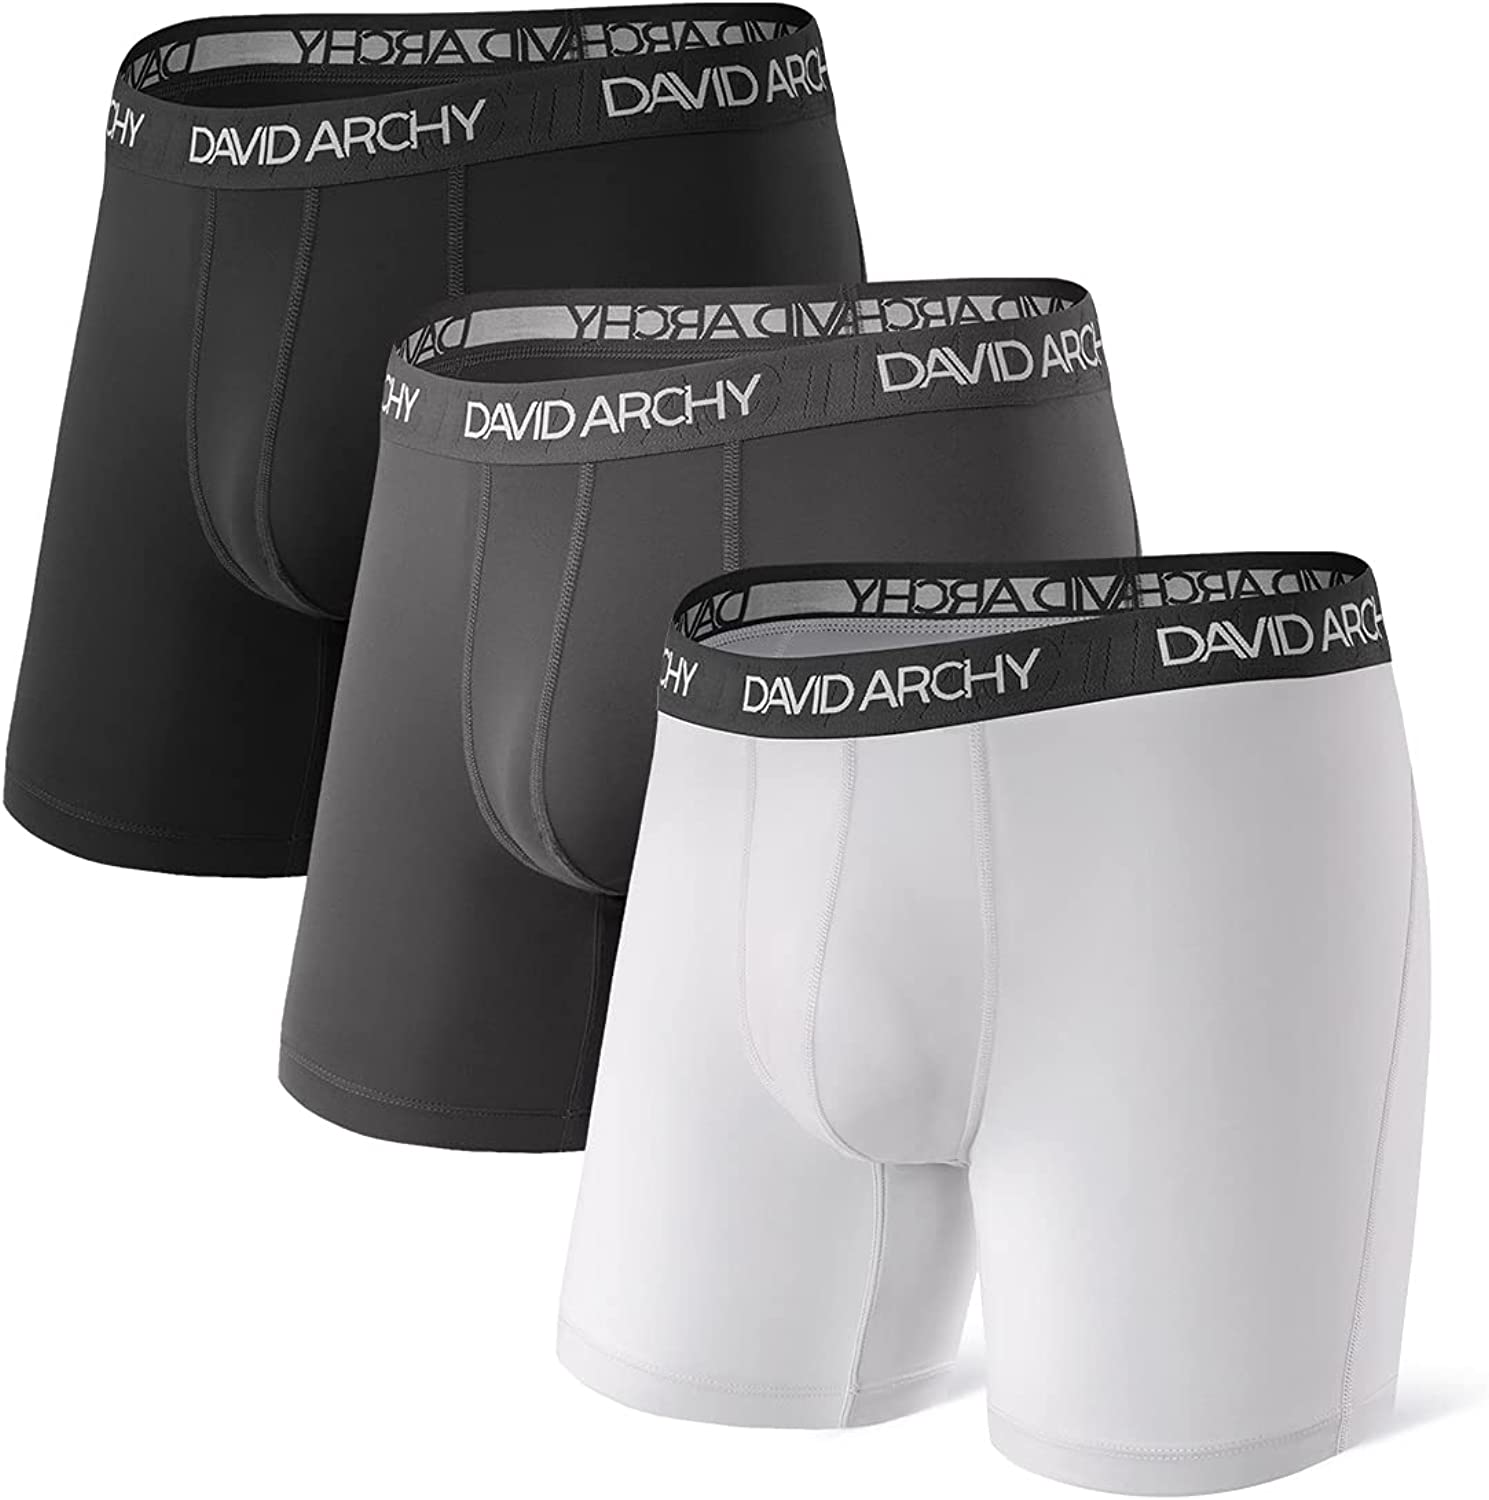 4 Packs Cotton Trunks with Pouch David Archy Soft Breathable